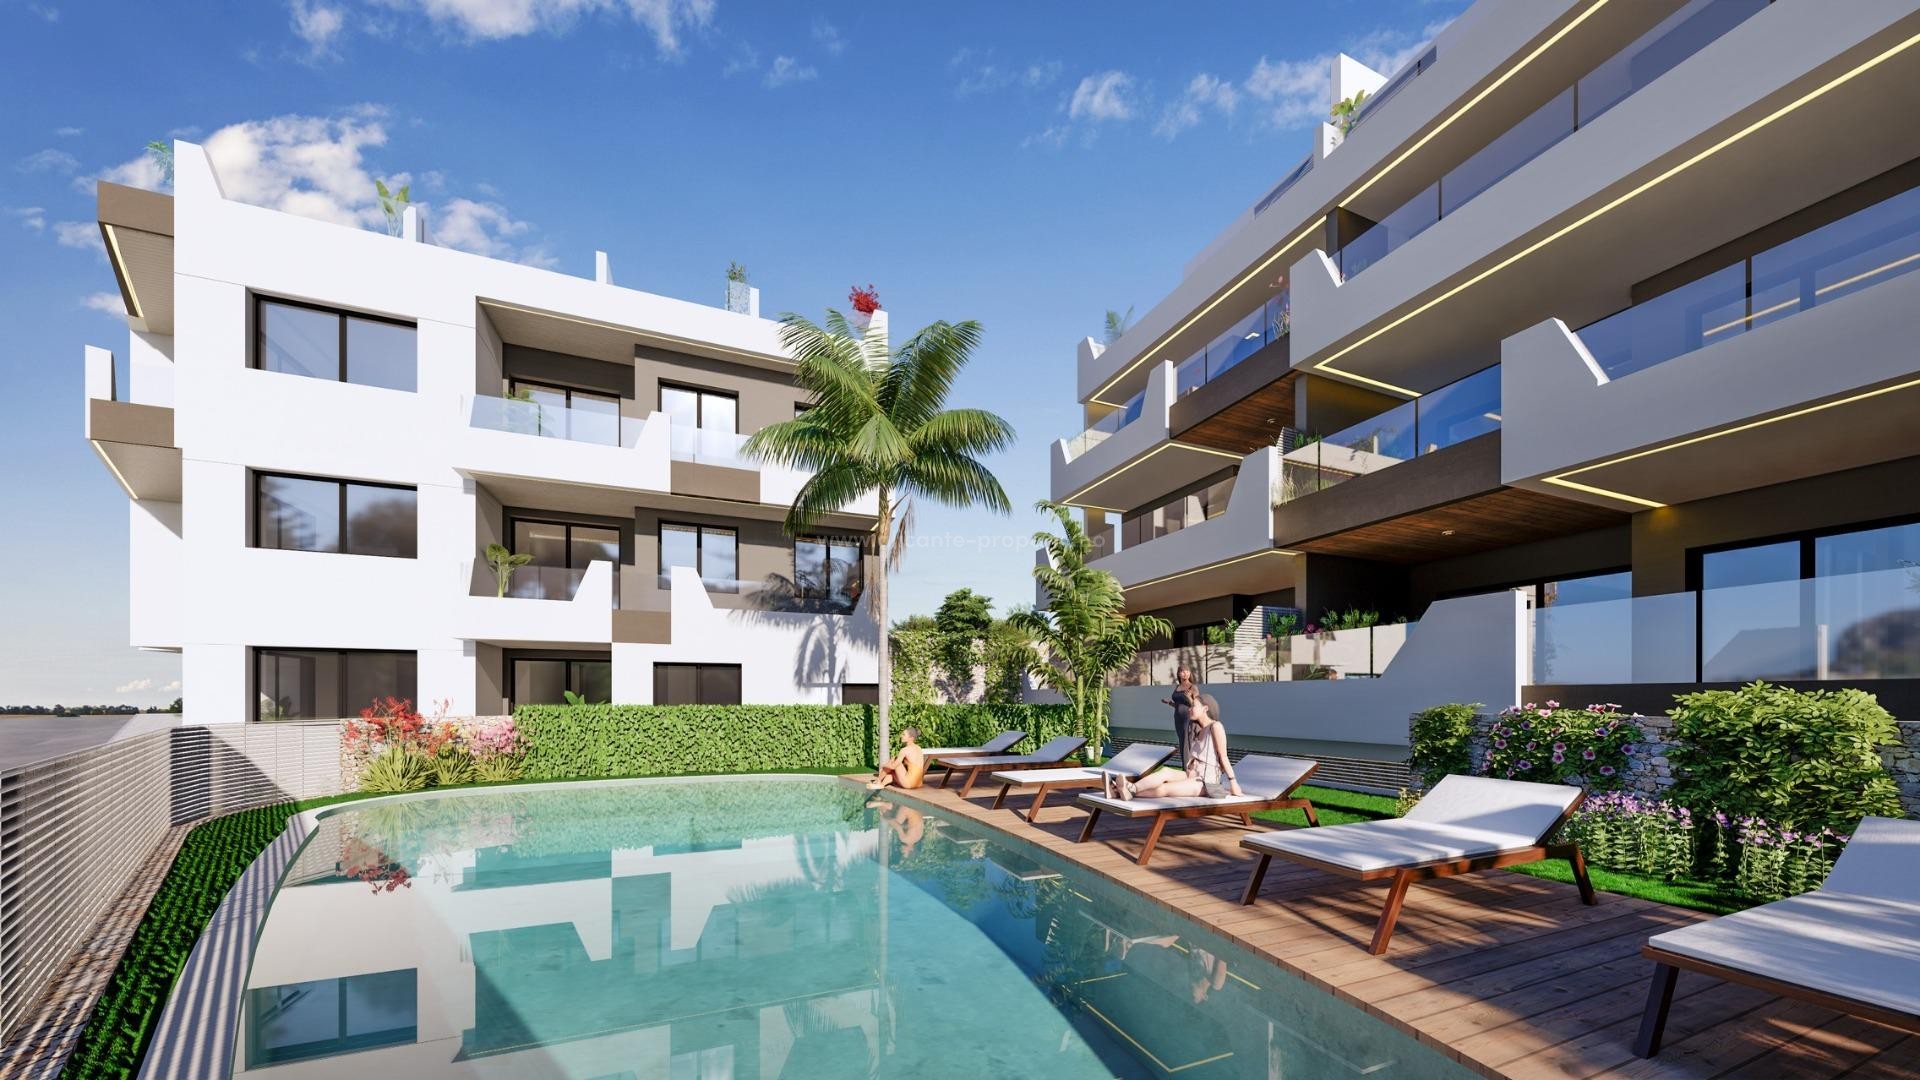 Apartments in Benijofar, 2/3 bedrooms, 2 bathrooms, penthouses with large private solarium large green area with swimming pool for all owners, as well as parking